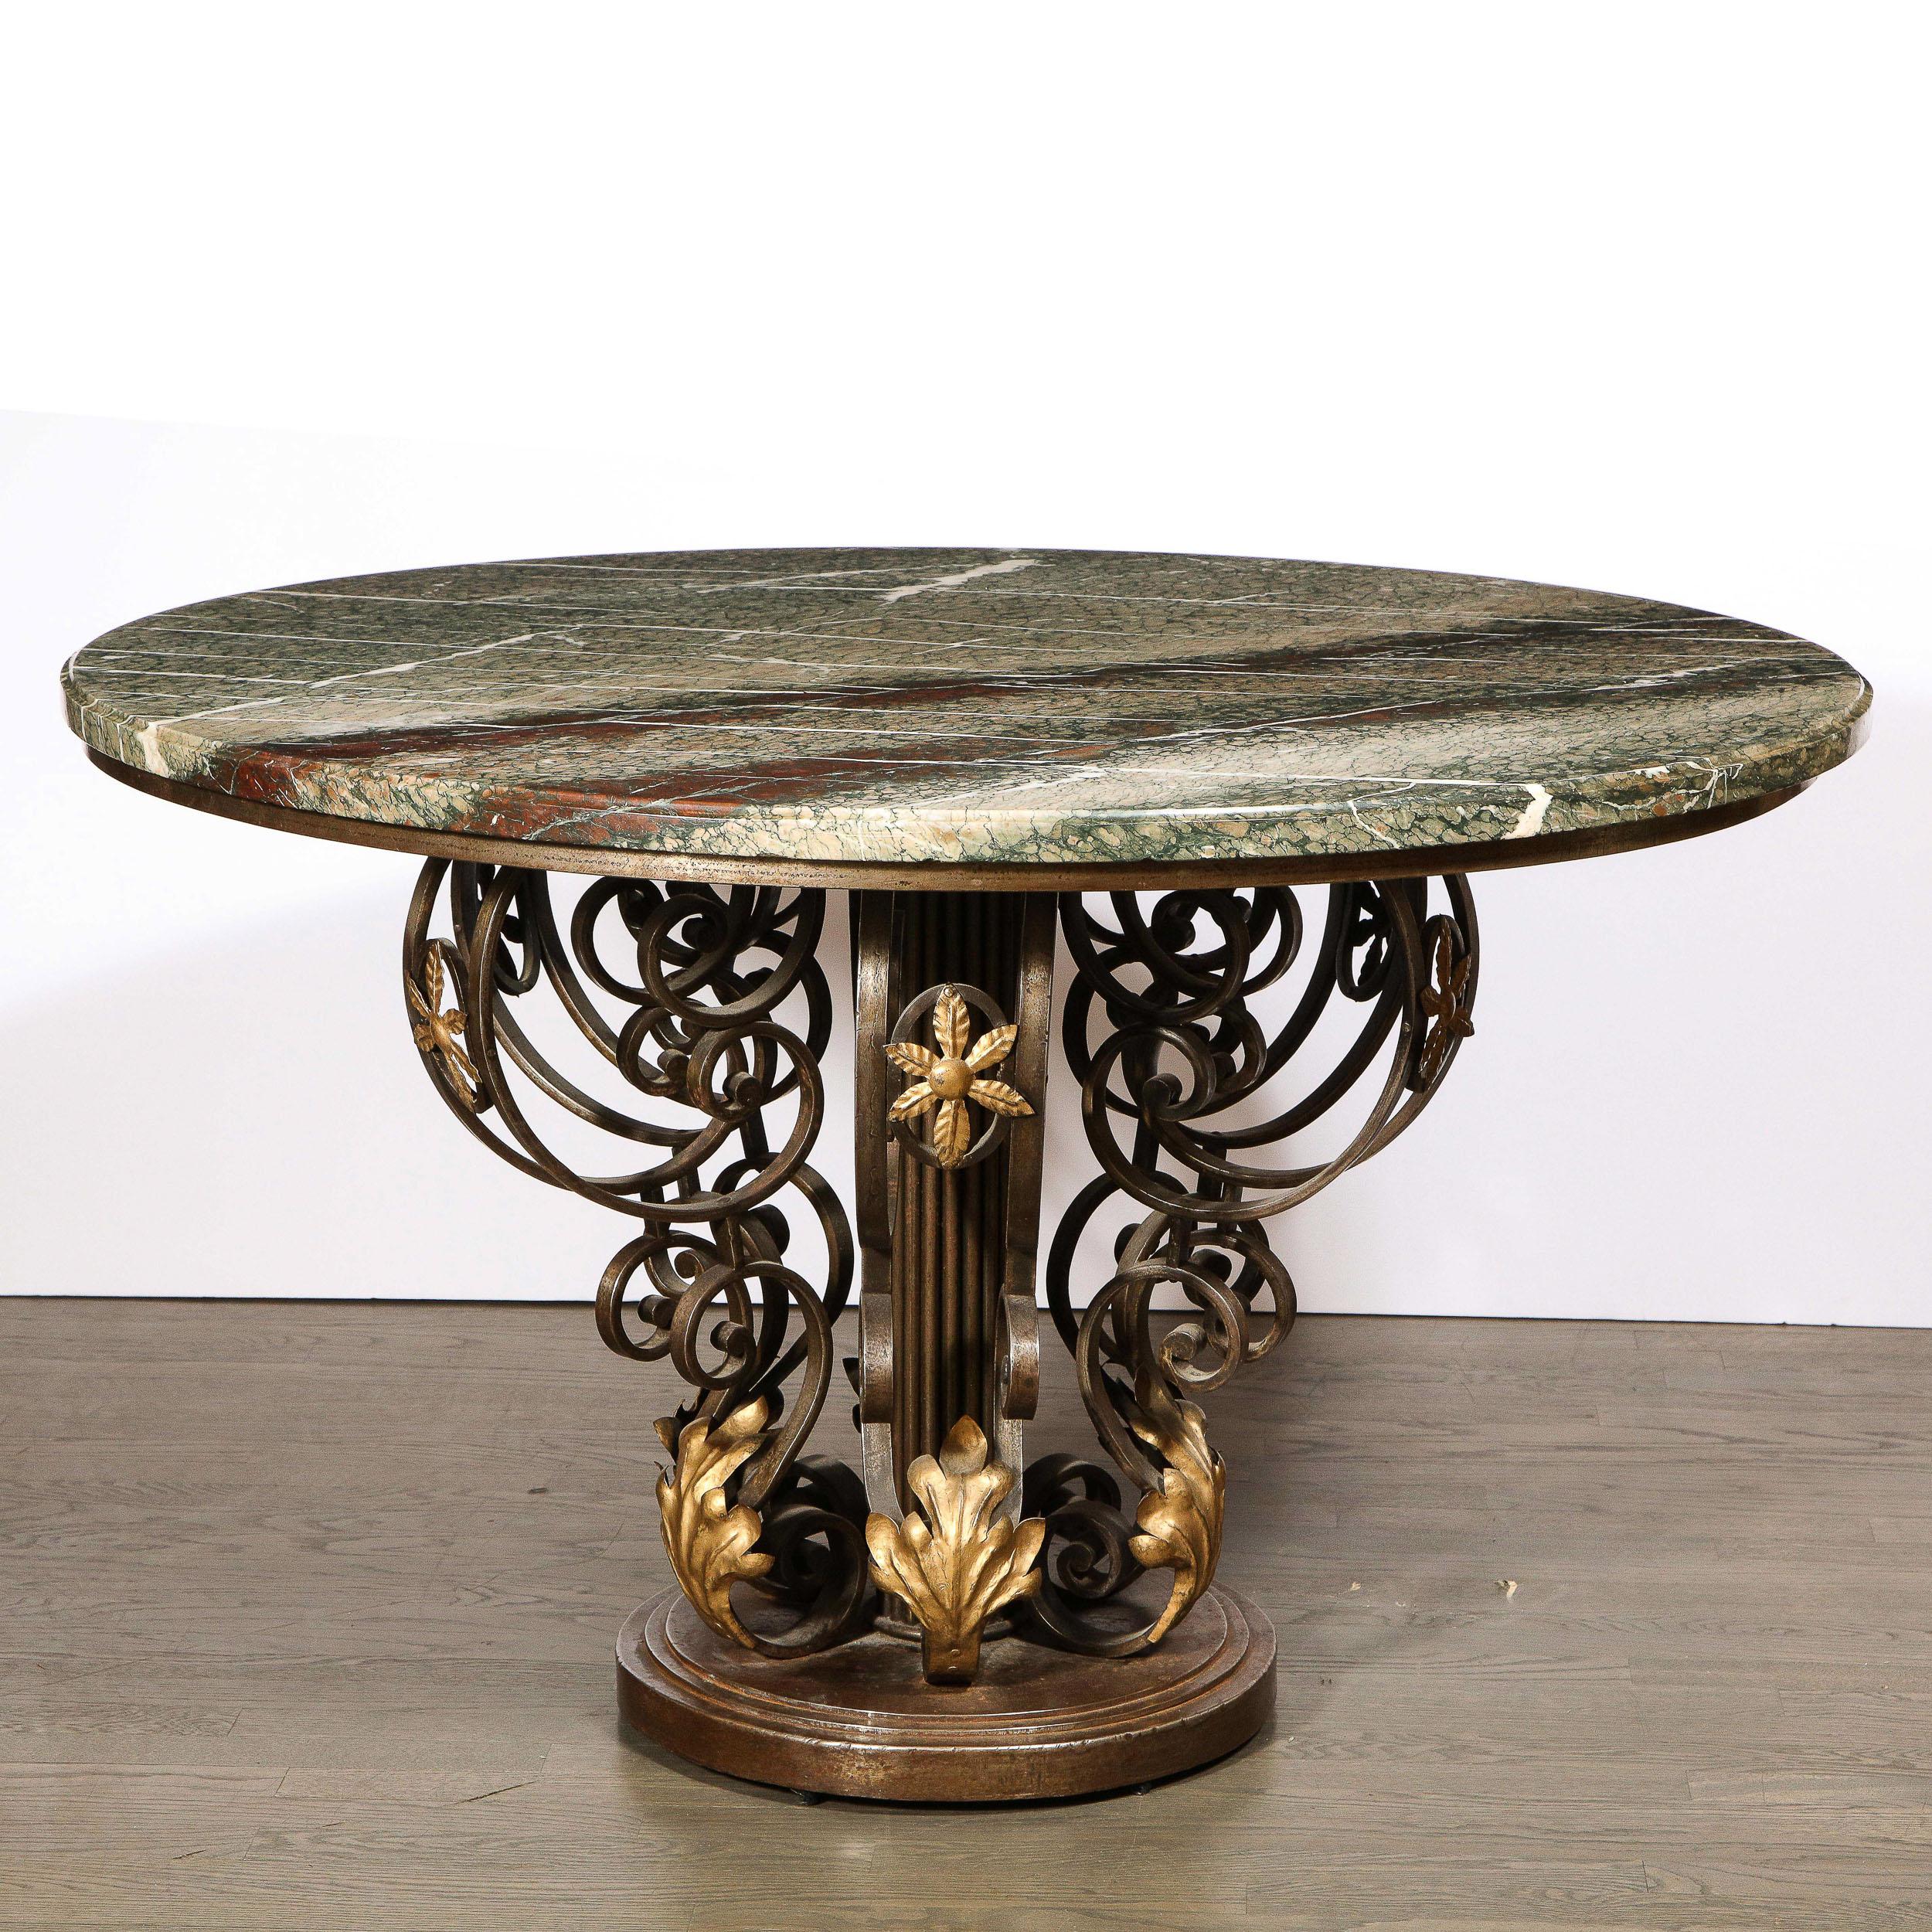 Created in the manner of Gilbert Poillerat, this stunning Art Deco table was realized in France circa 1940. It features an intricate sculptural base in hand wrought iron with stylized foliate gilded accents throughout. The beveled circular top is